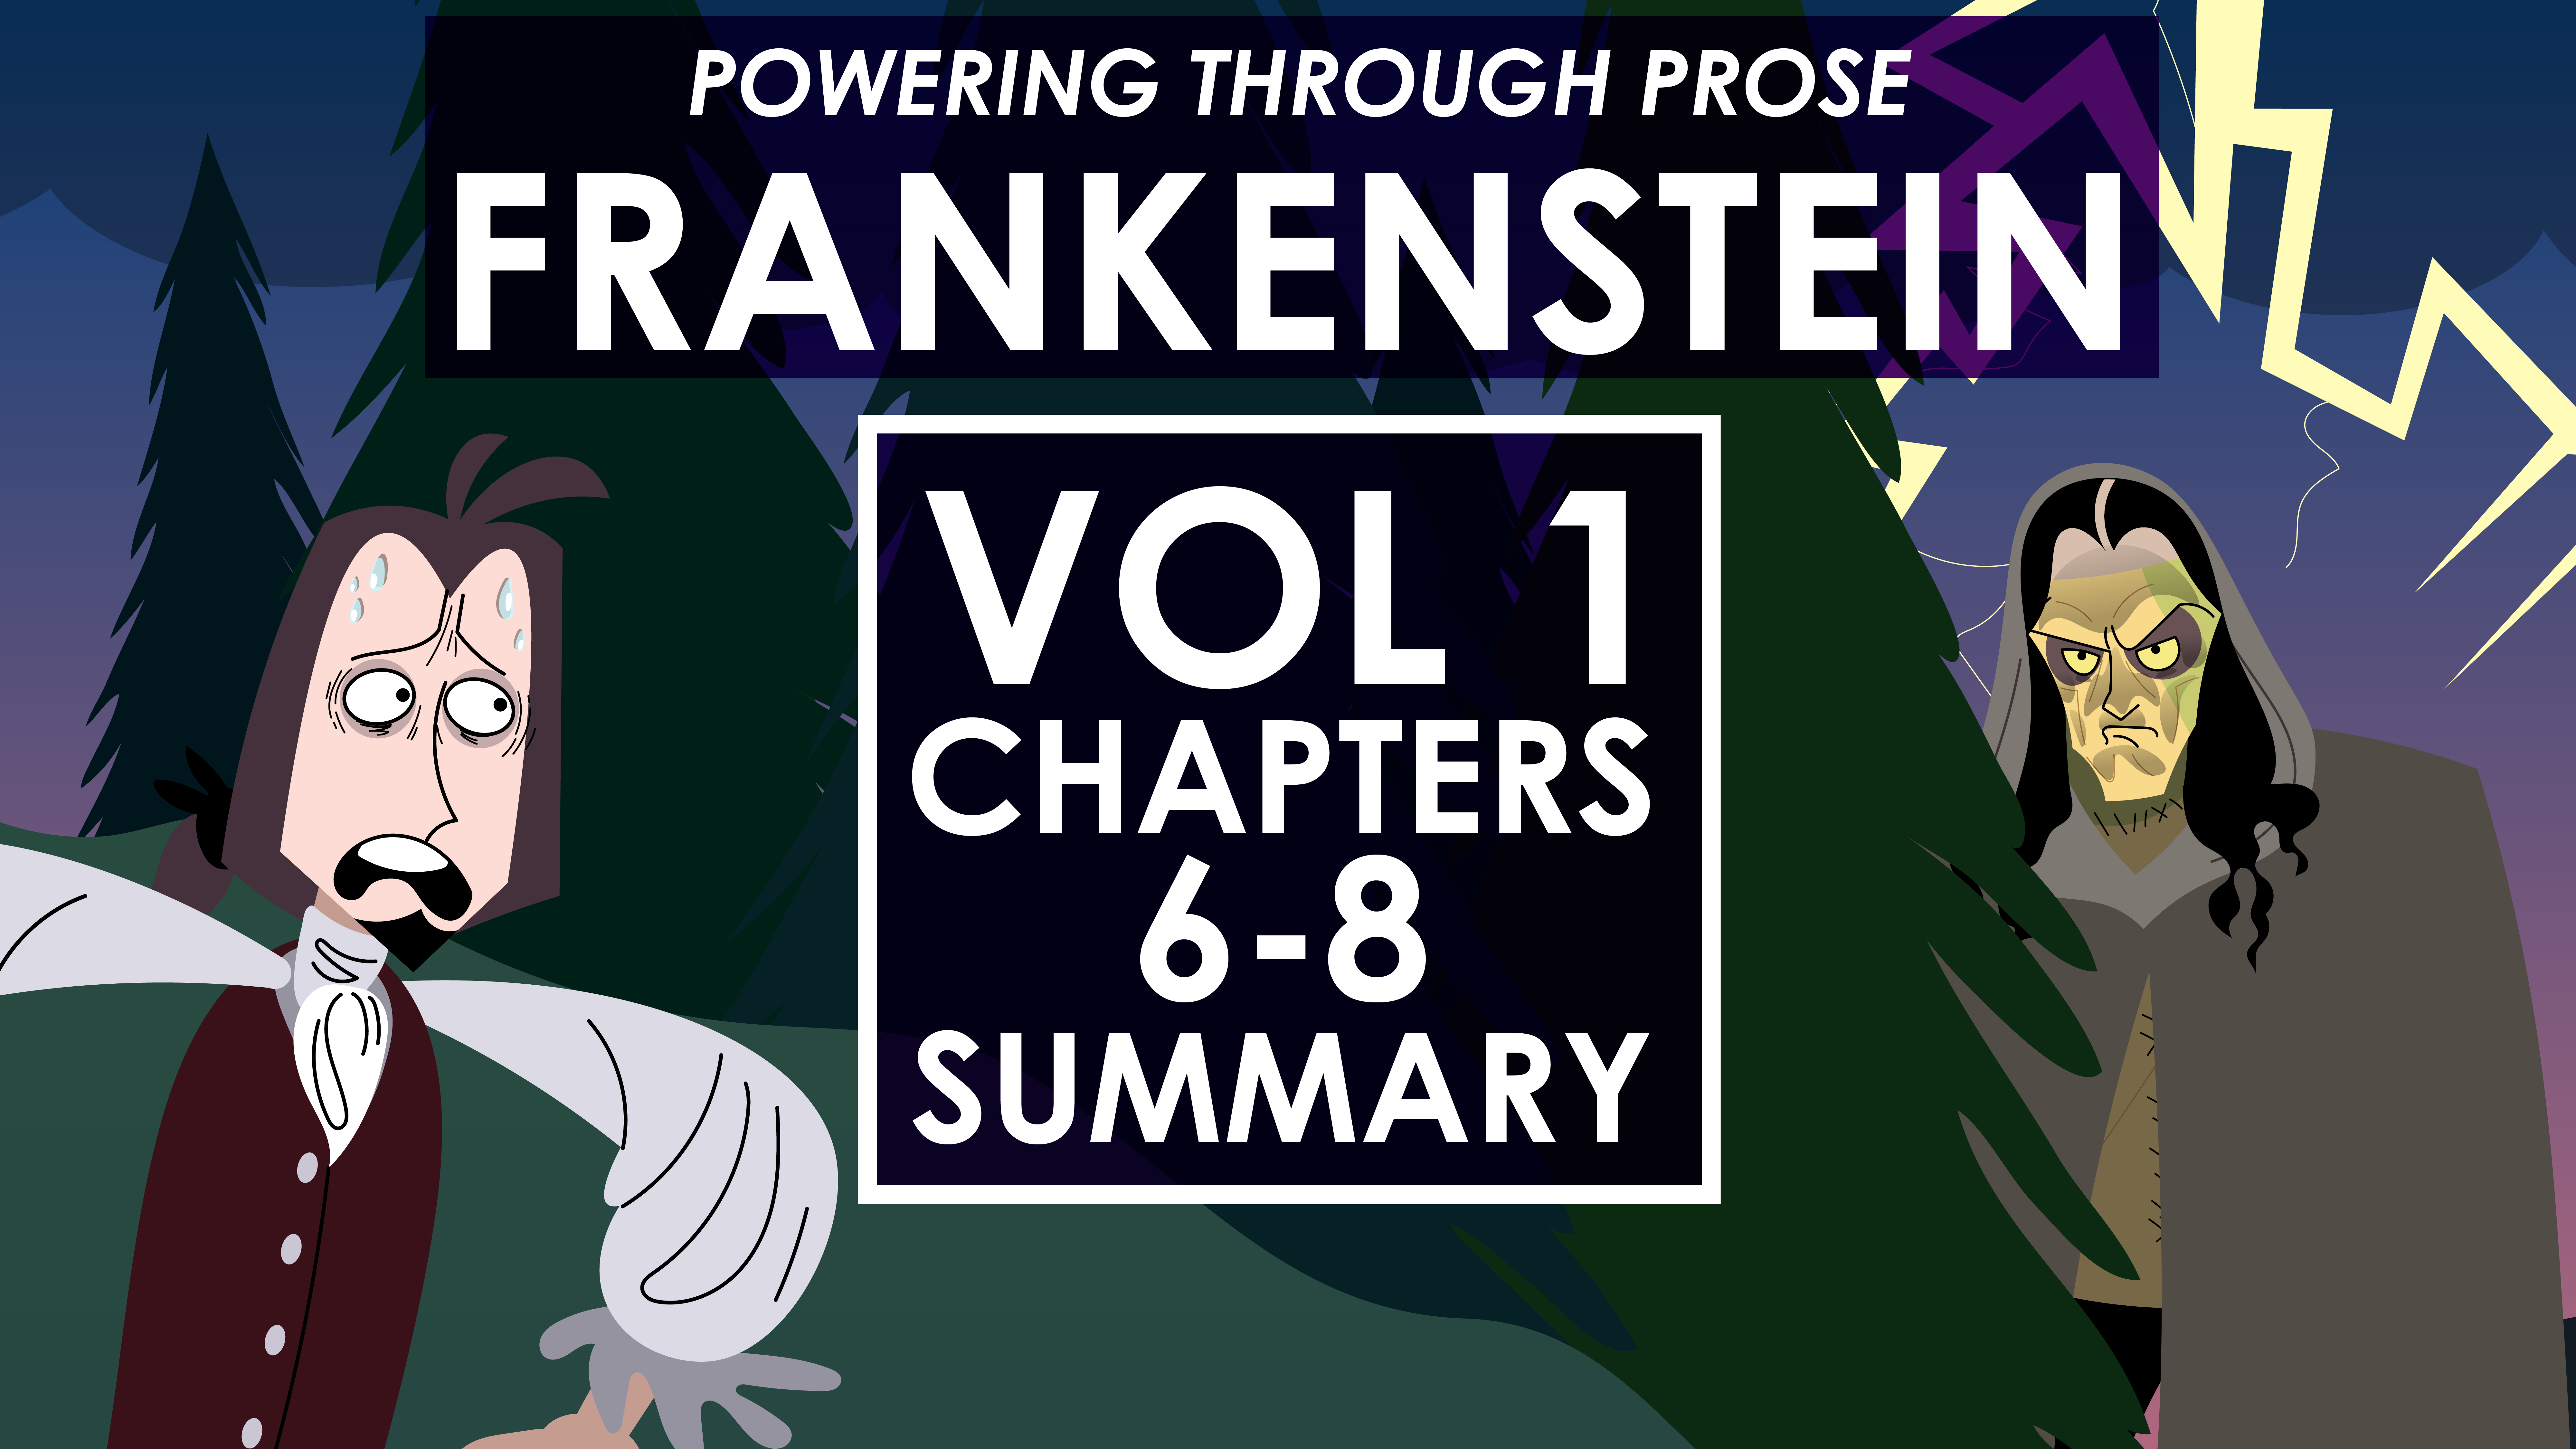 Frankenstein - Mary Shelley - Chapters 6-8 - Powering Through Prose Series